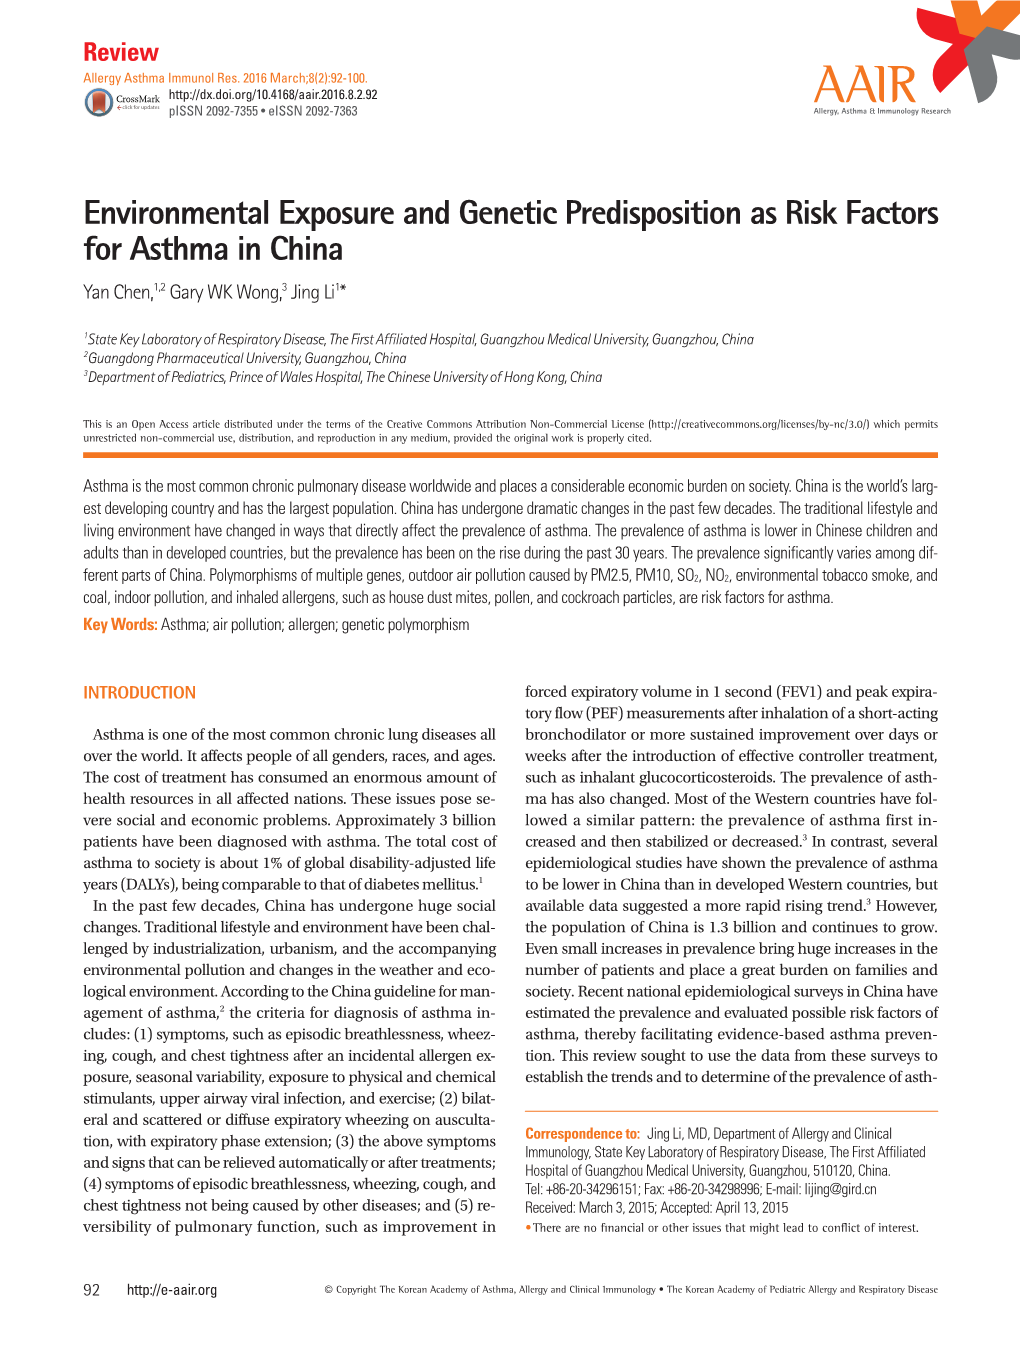 Environmental Exposure and Genetic Predisposition As Risk Factors for Asthma in China Yan Chen,1,2 Gary WK Wong,3 Jing Li1*